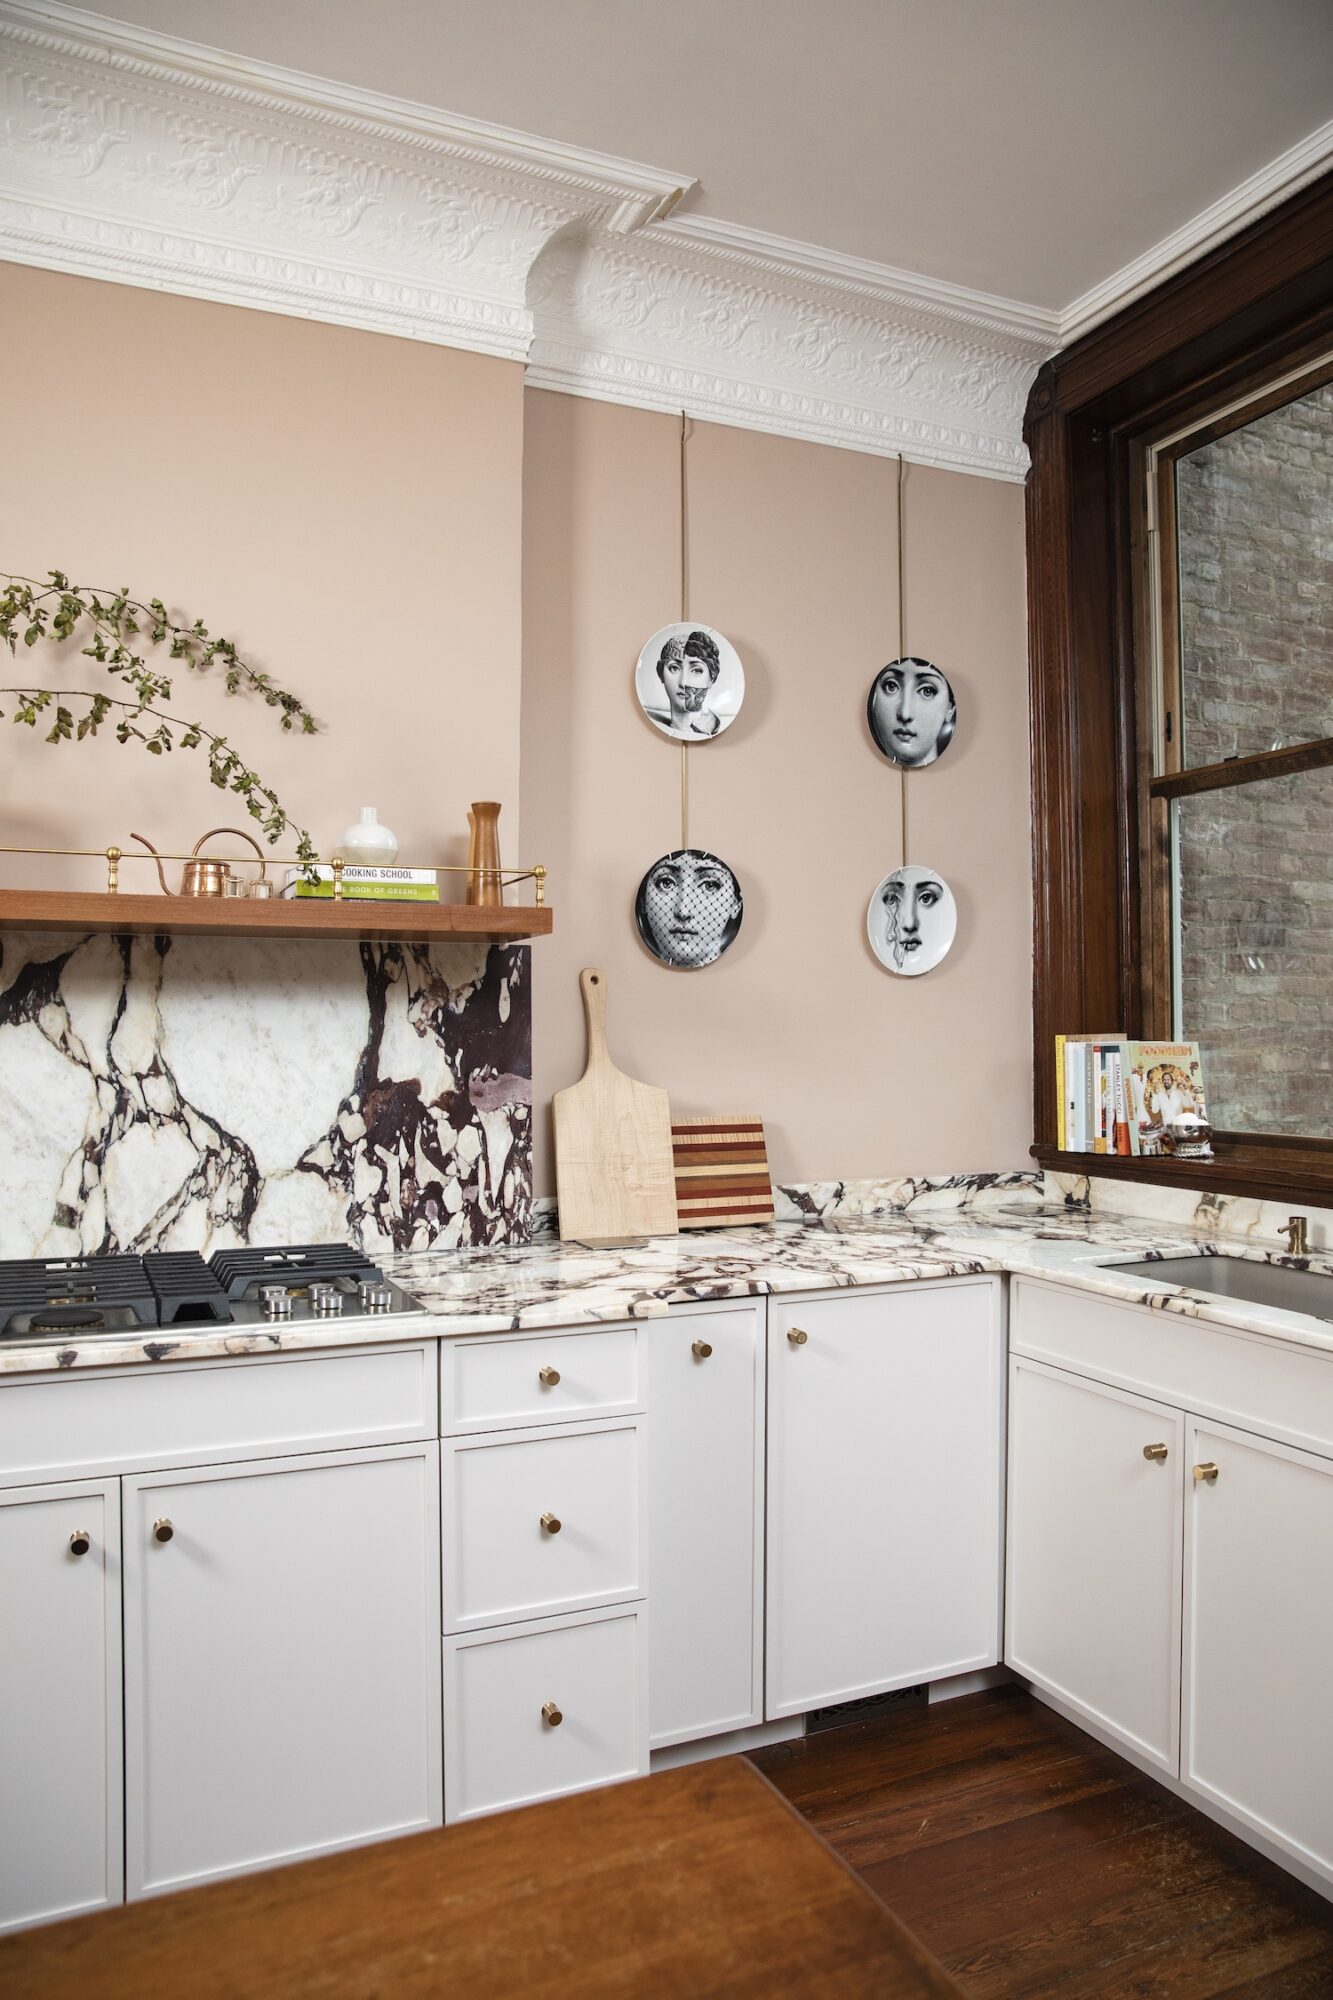 A kitchen with peachy-pink walls, white cabinetry, and black-and-white stone countertops and backsplash.